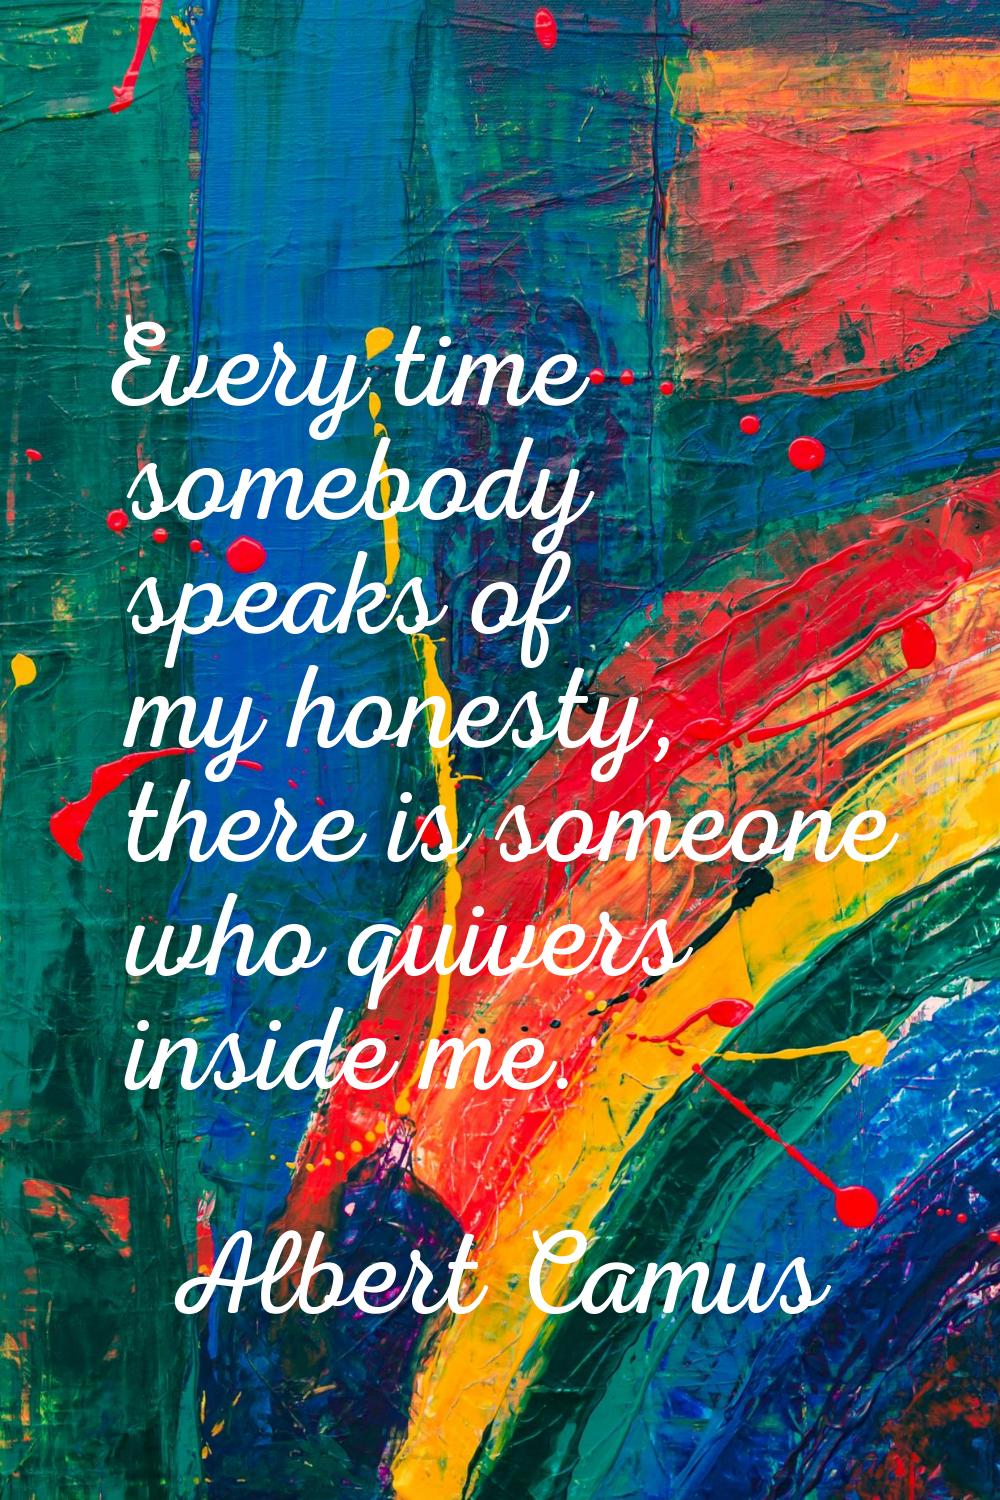 Every time somebody speaks of my honesty, there is someone who quivers inside me.